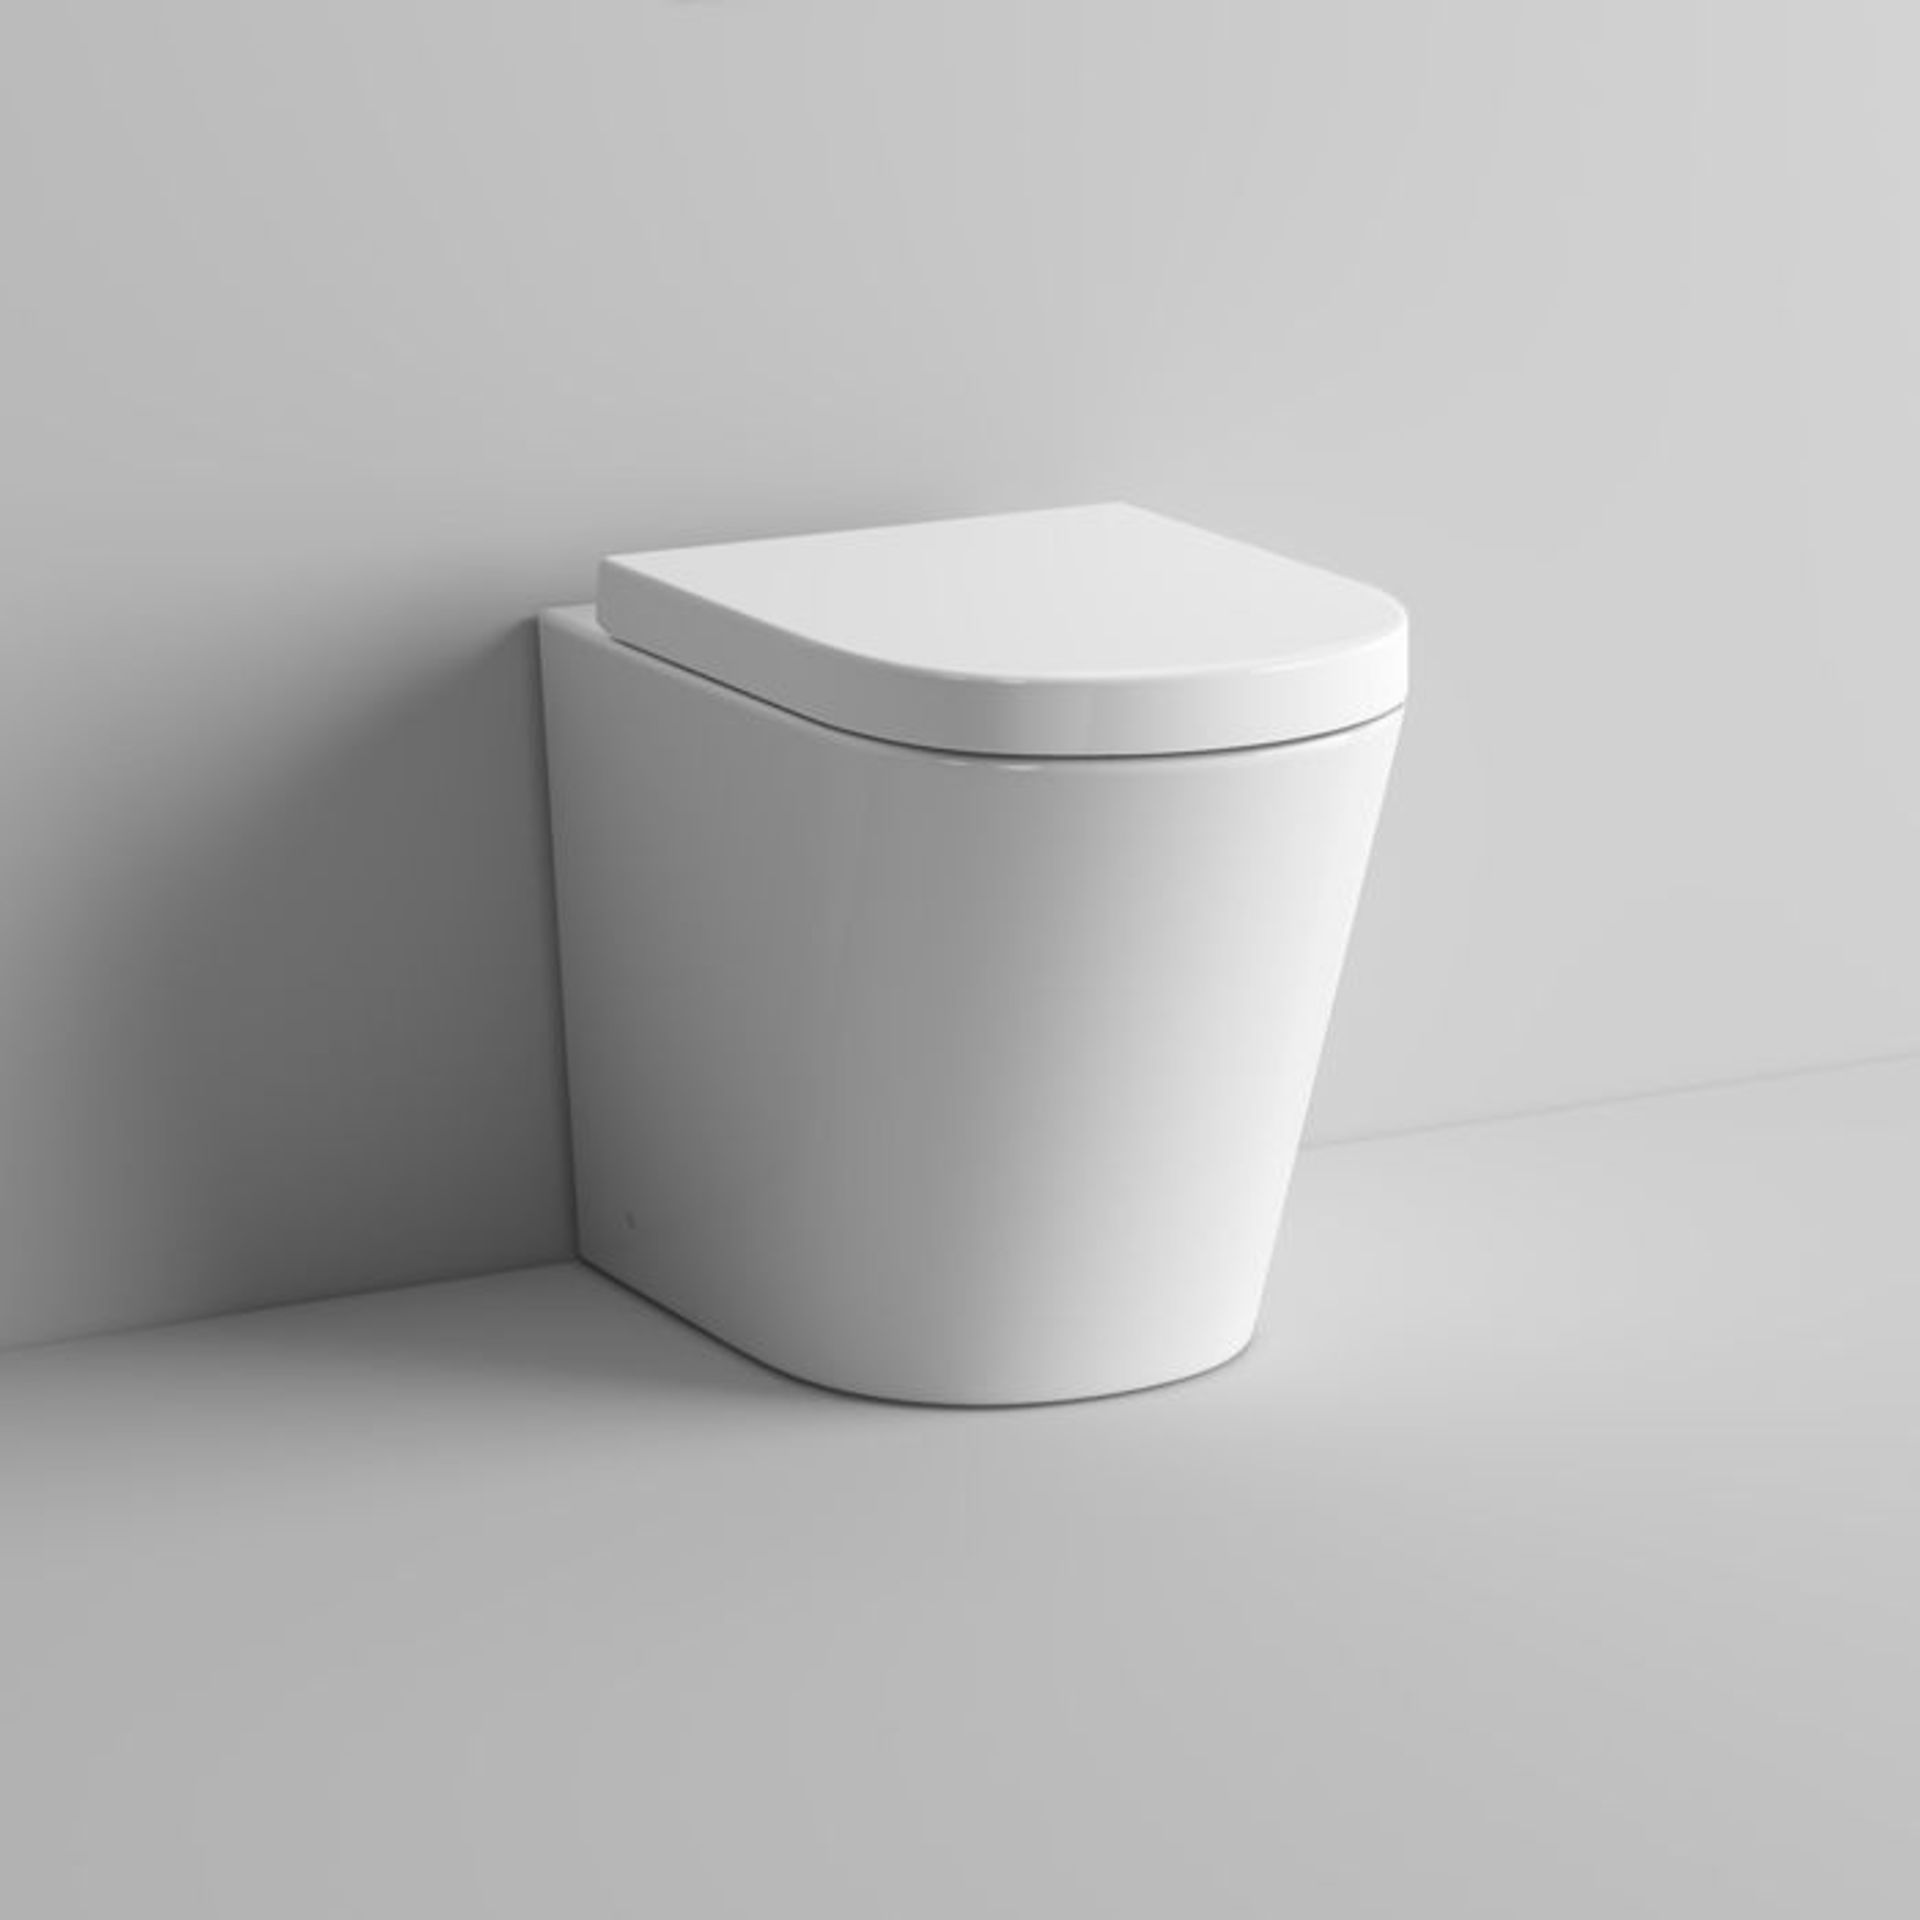 (P251) Lyon Back to Wall Toilet inc Luxury Soft Close Seat. Our Lyon back to wall toilet is made - Image 3 of 4